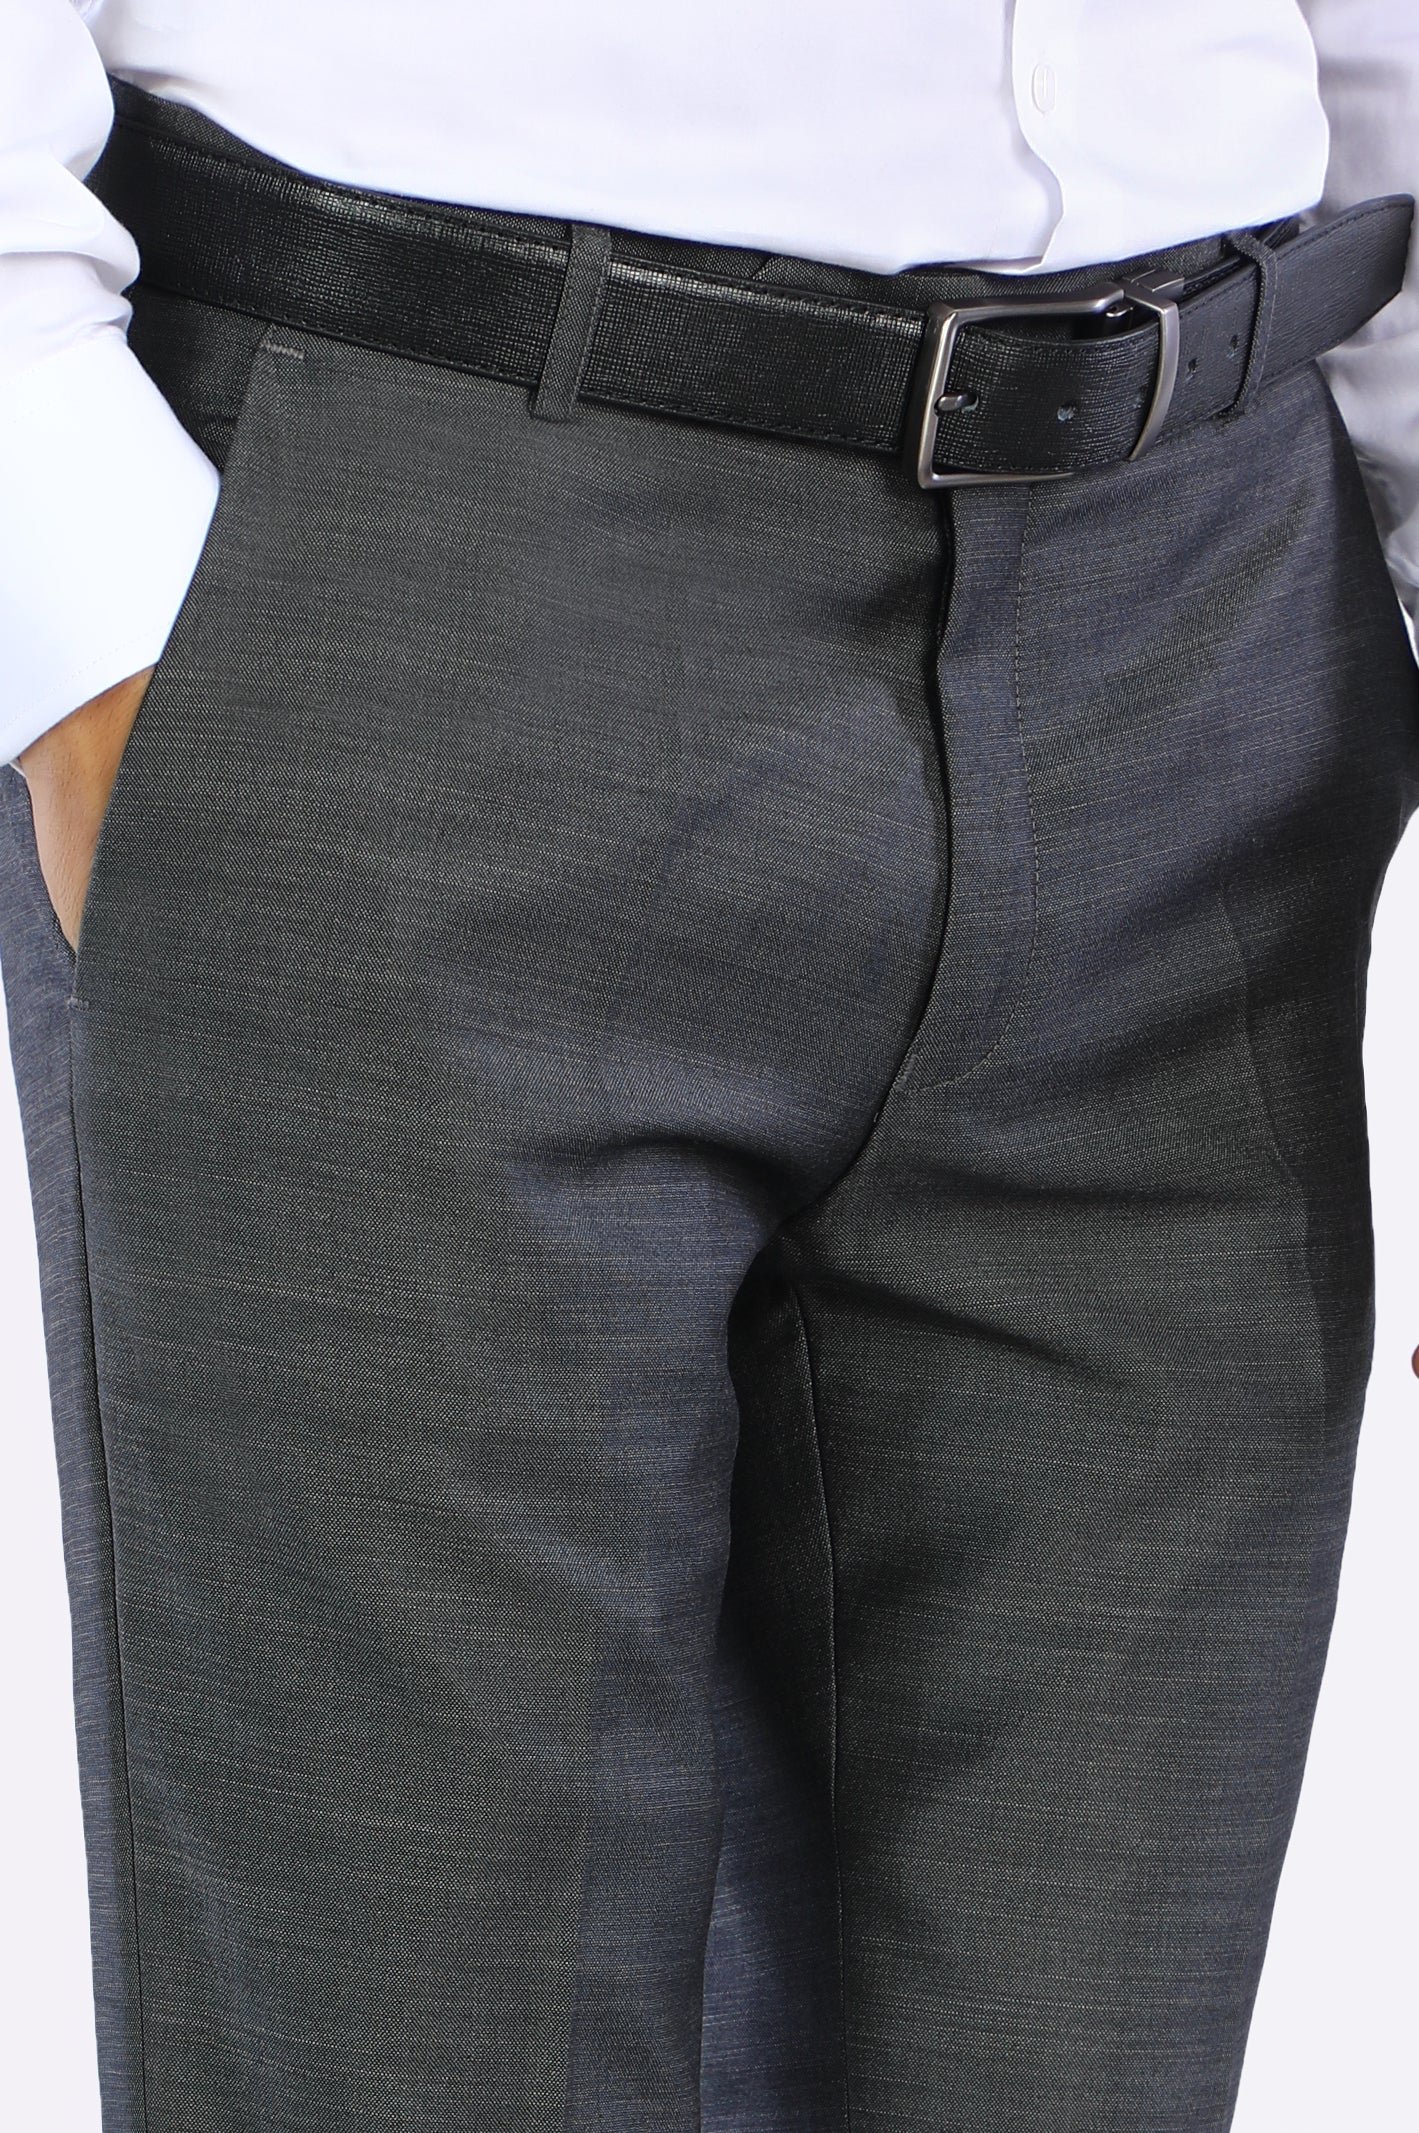 Formal Trouser for Men From Diners